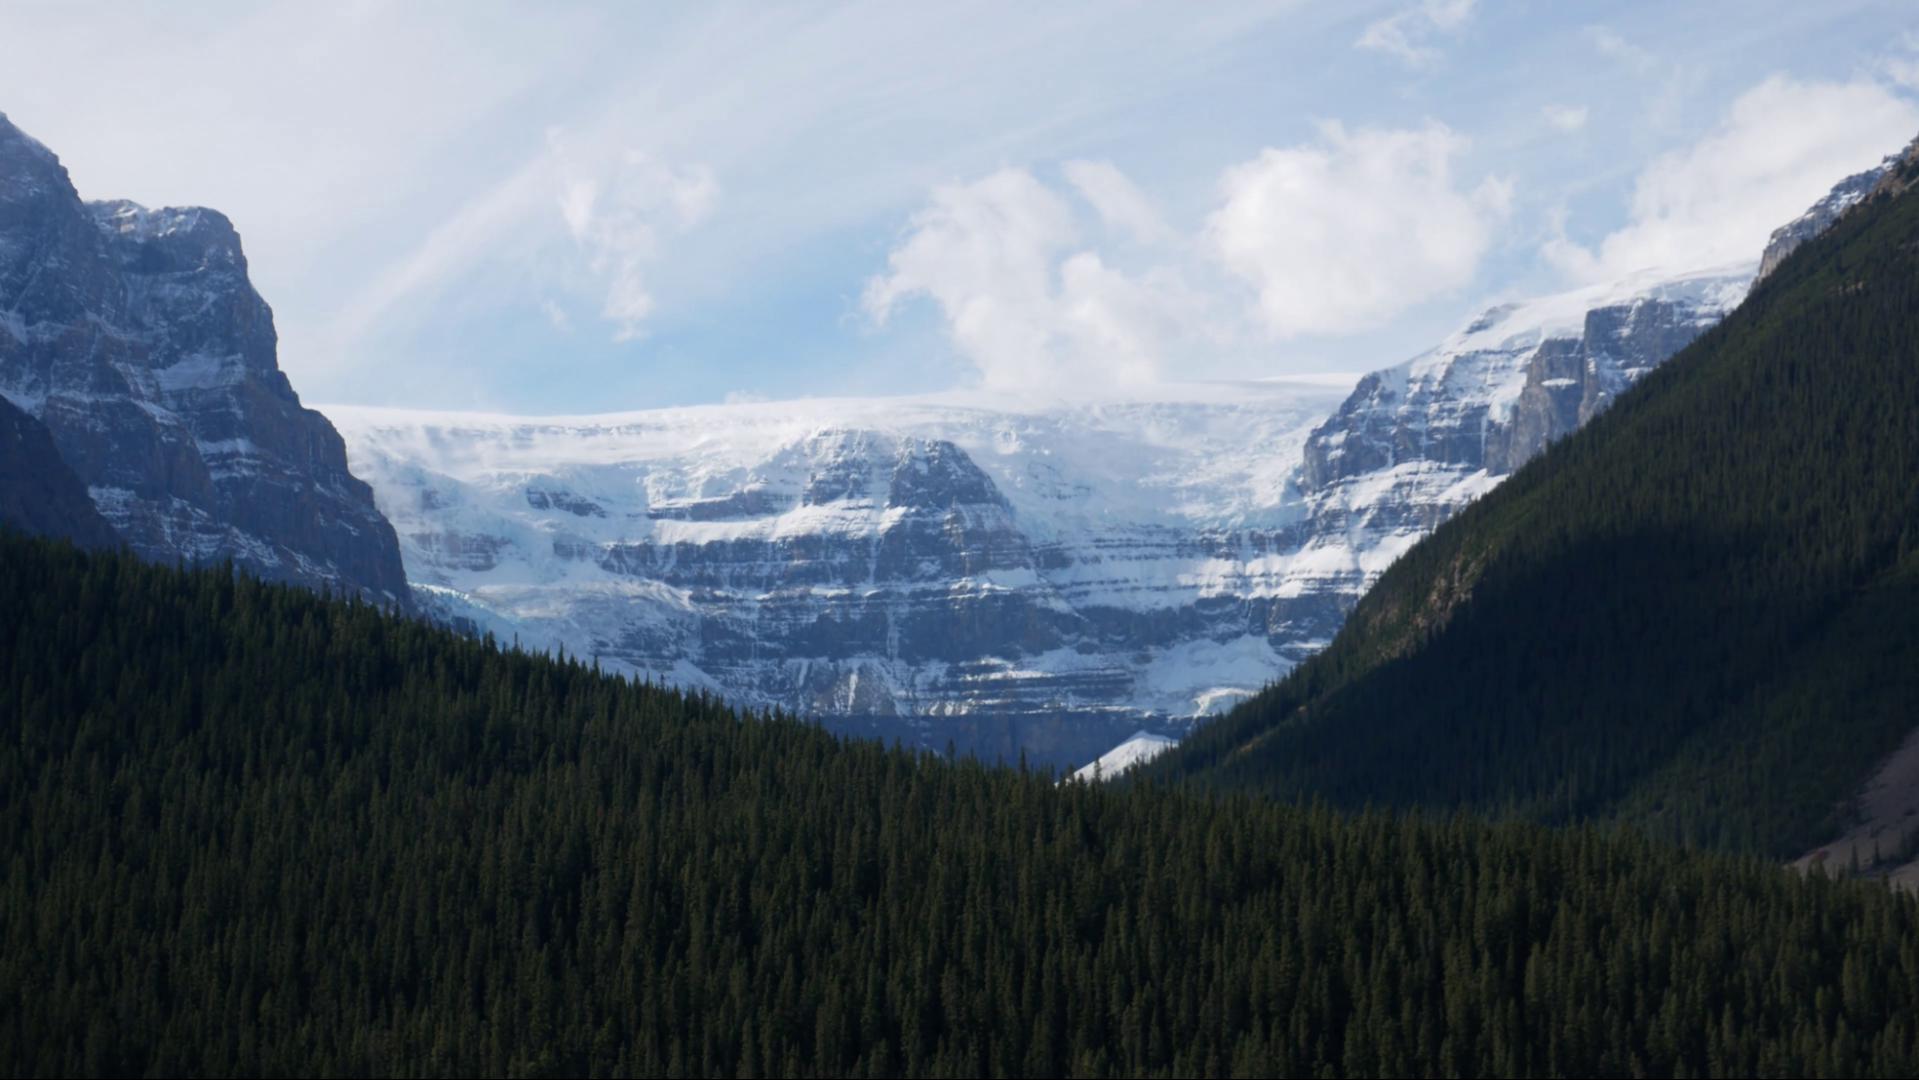 View of the Stutfield Glacier from the Stutfield Glacier Lookout on the Icefields Parkway between Jasper and Banff National Parks in Alberta, Canada. 